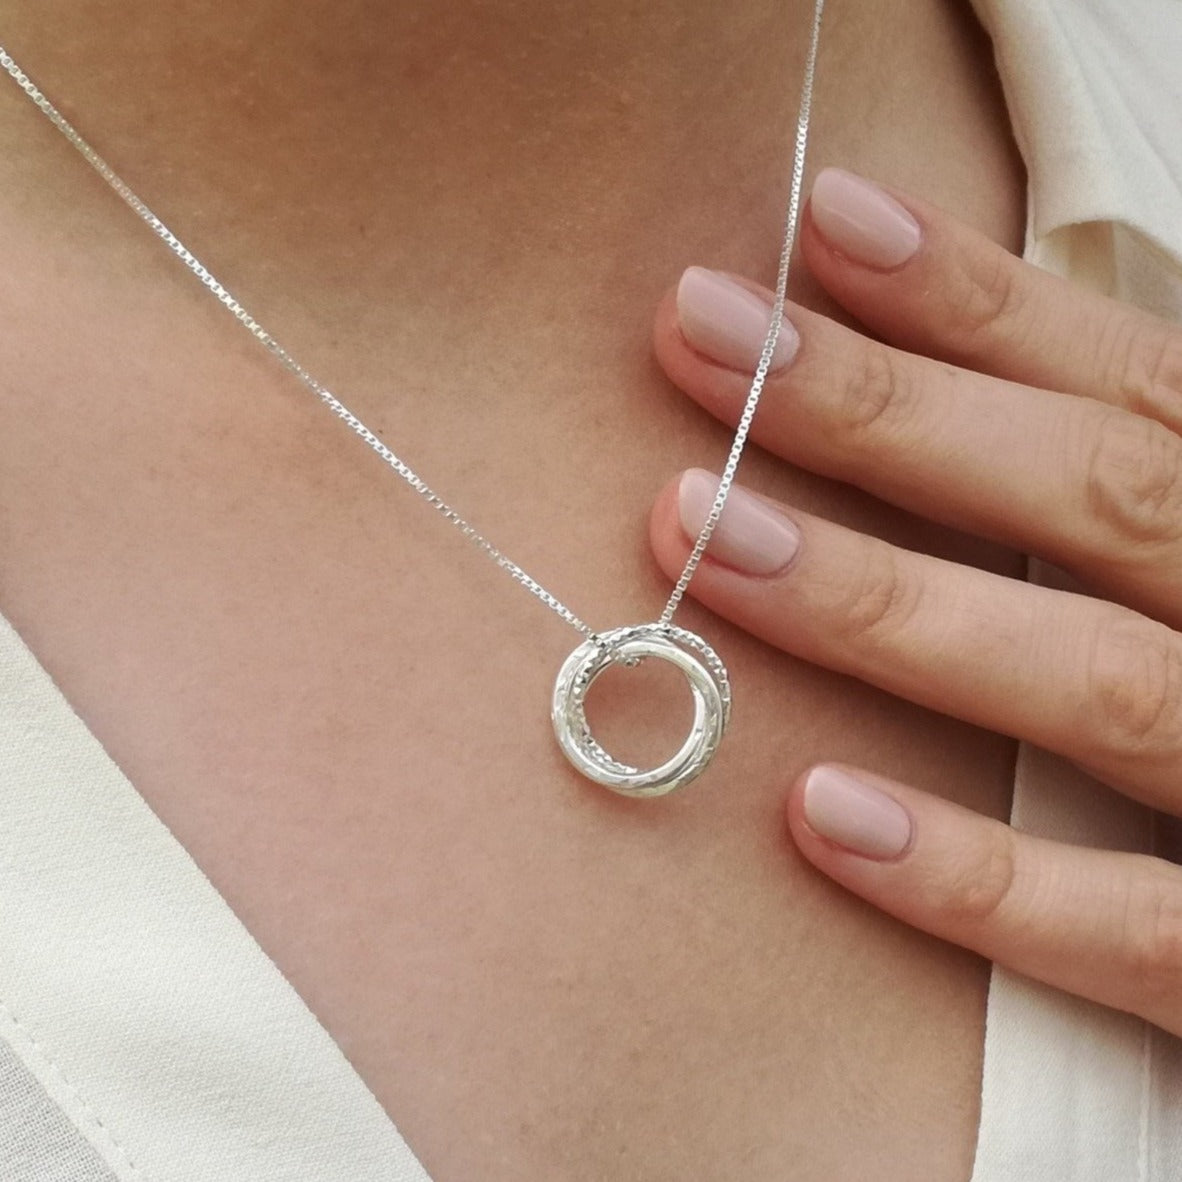 Engraved Russian Ring Necklace in Sterling Silver with Diamond | Forever My